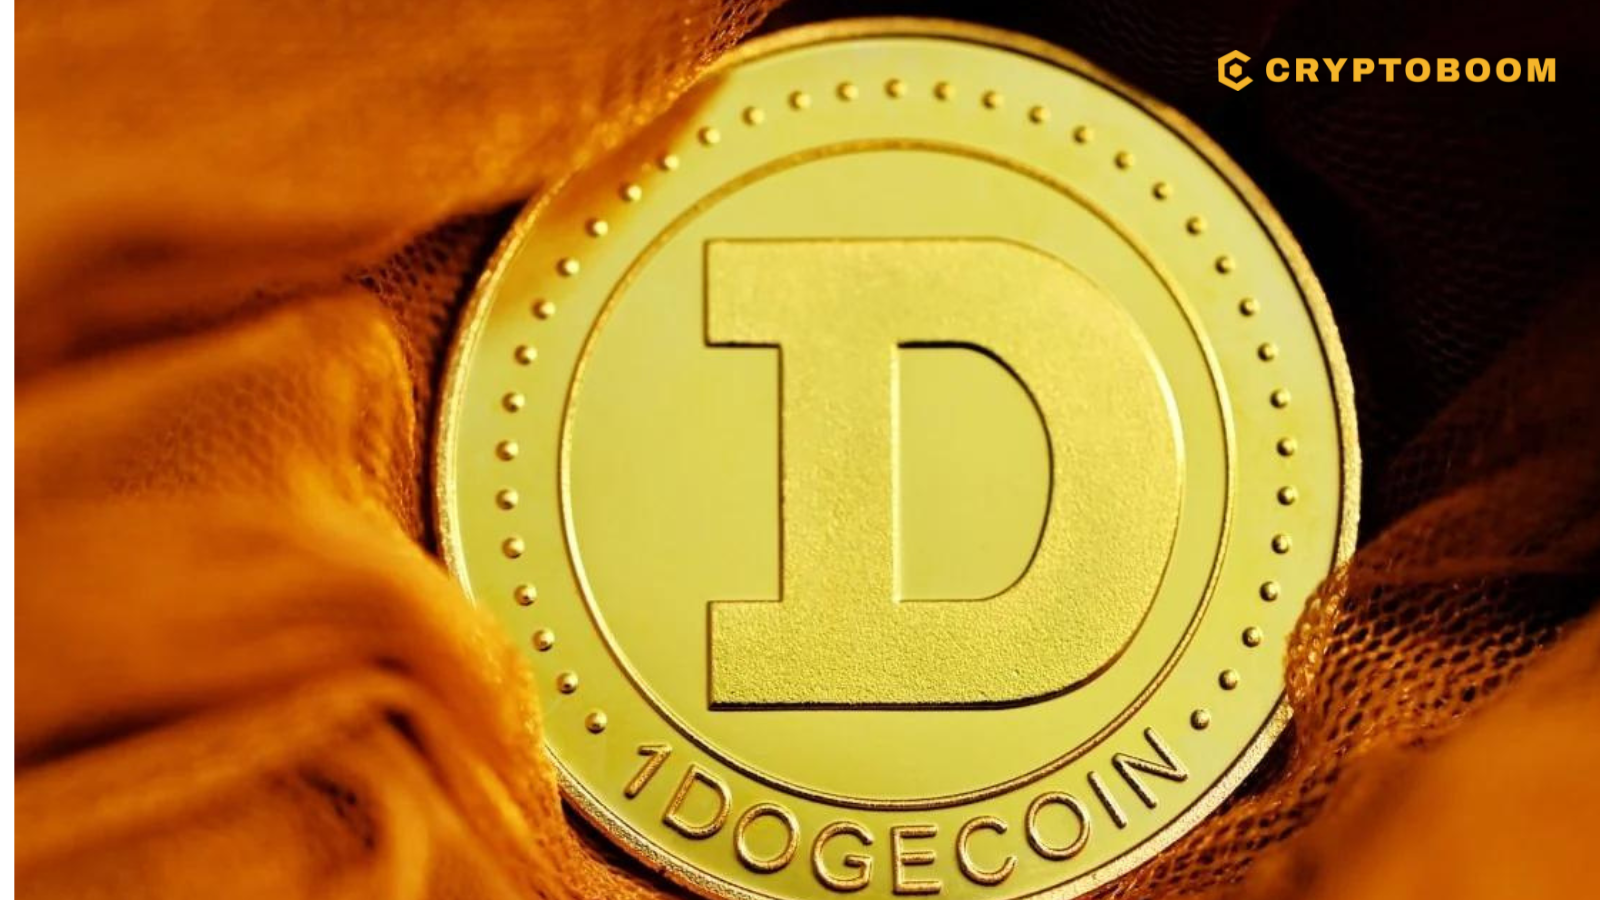 Dogecoin Surges Ahead: Is Bitcoin's Reign Coming to an End?